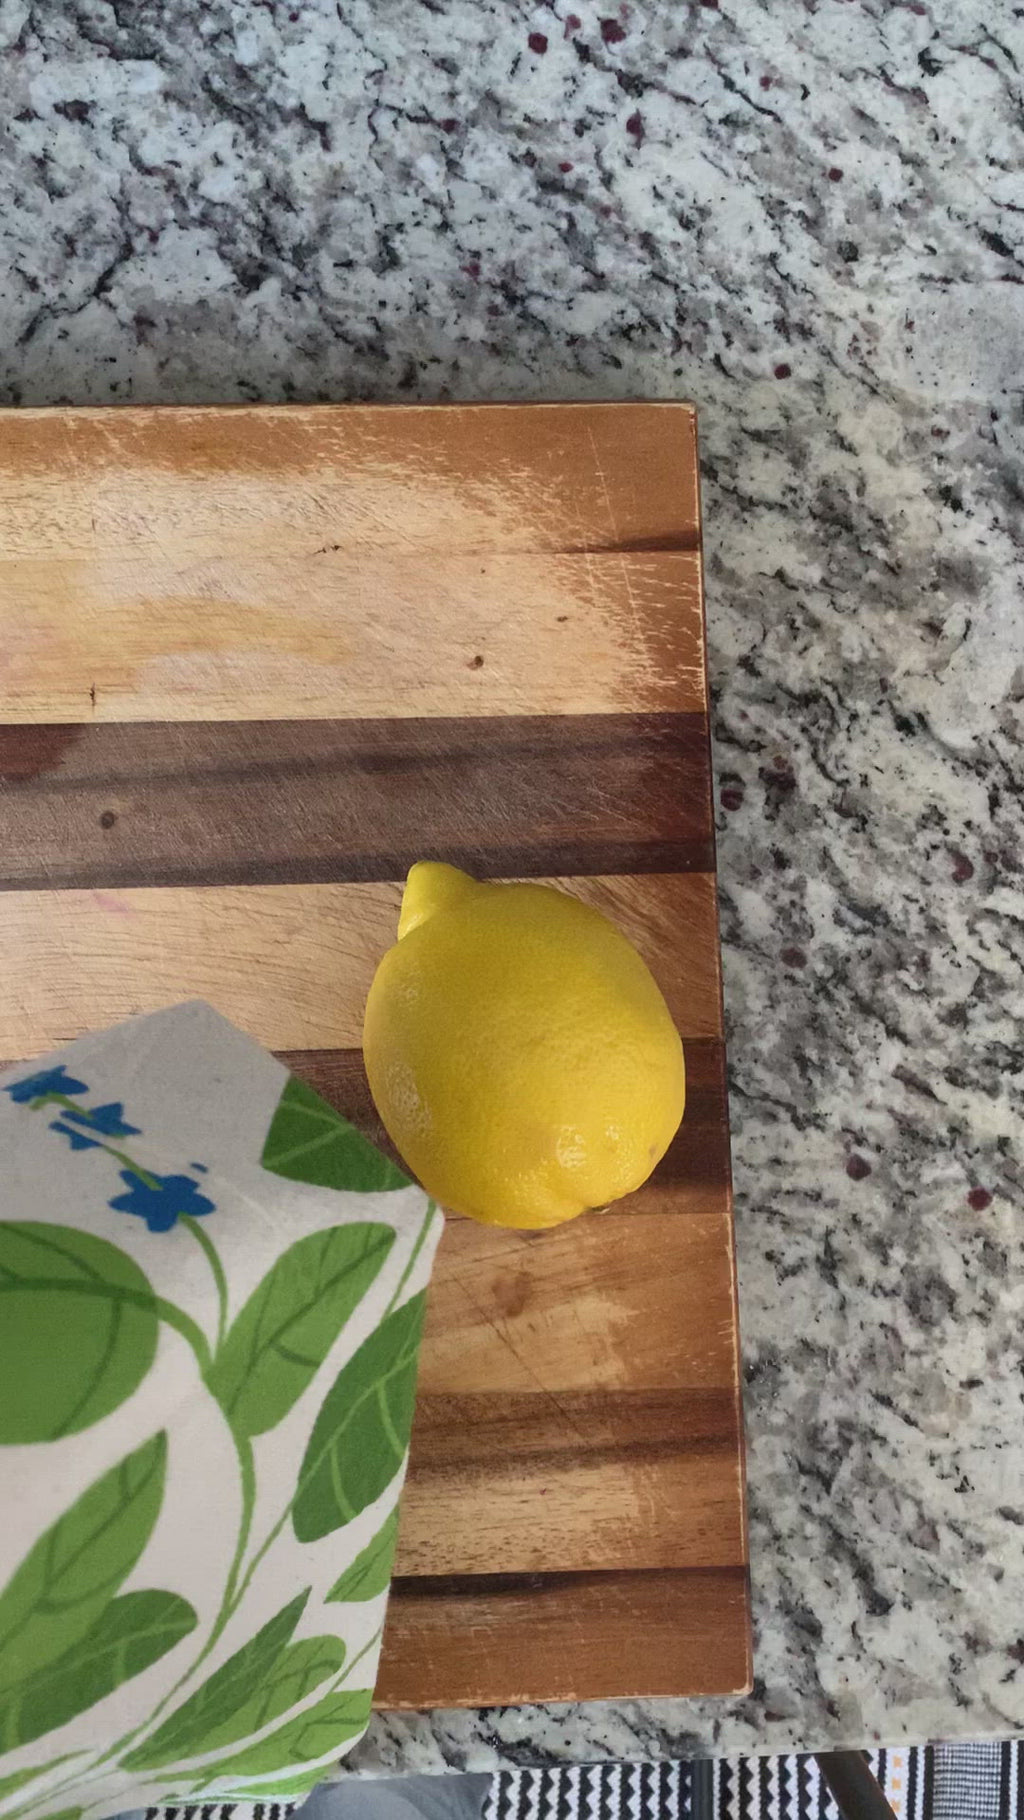 A demonstration video of a dish towel used to rub a lemon.